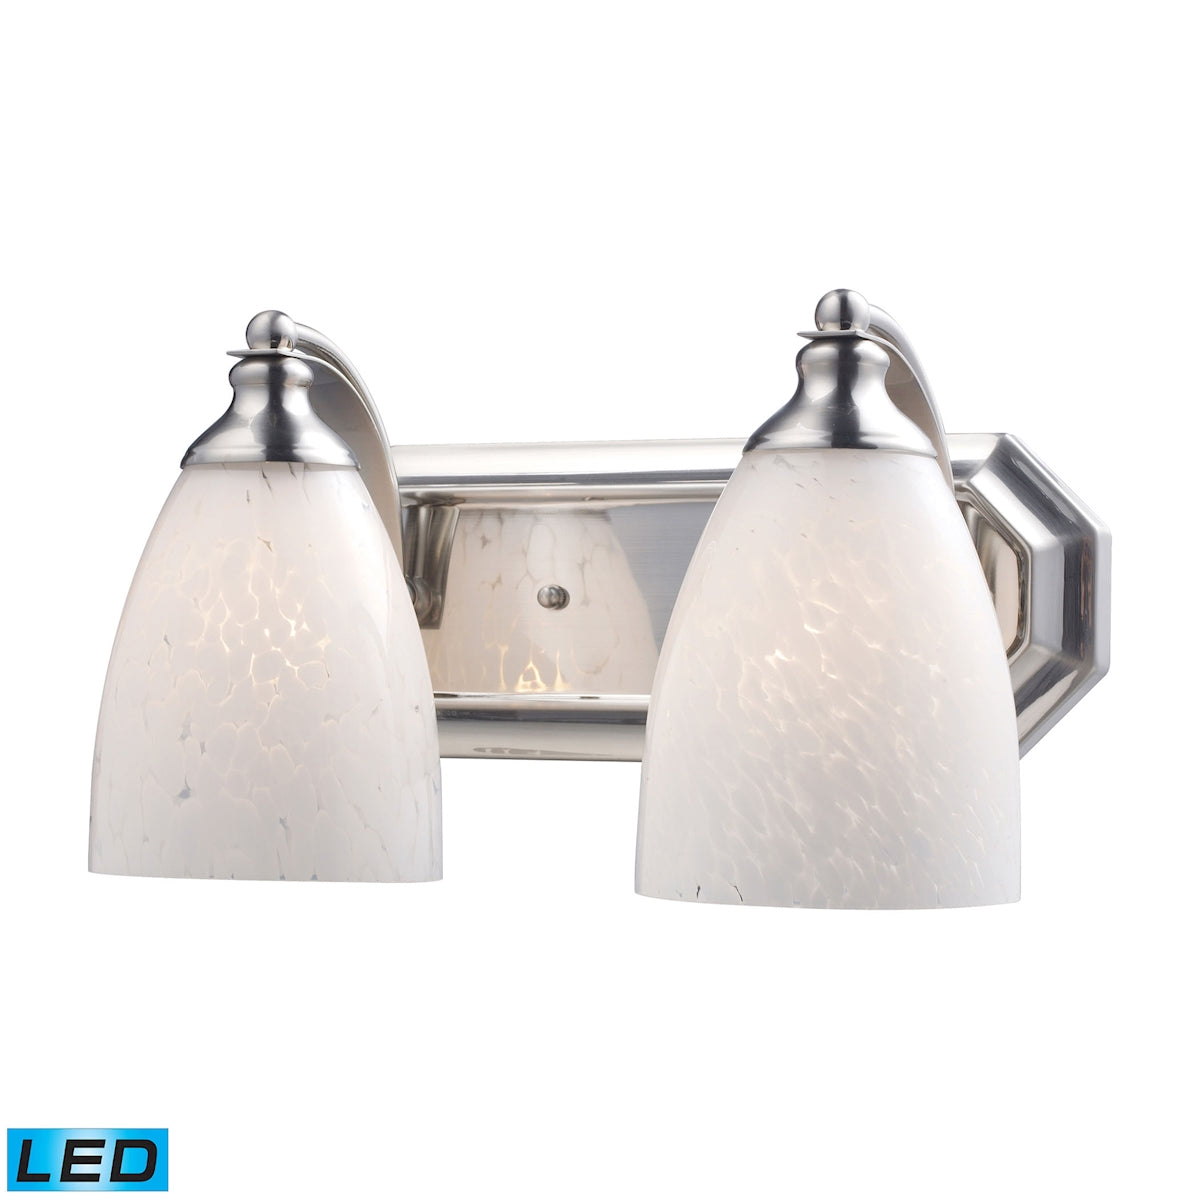 ELK Lighting 570-2N-SW-LED Mix-N-Match Vanity 2-Light Wall Lamp in Satin Nickel with Snow White Glass - Includes LED Bulbs